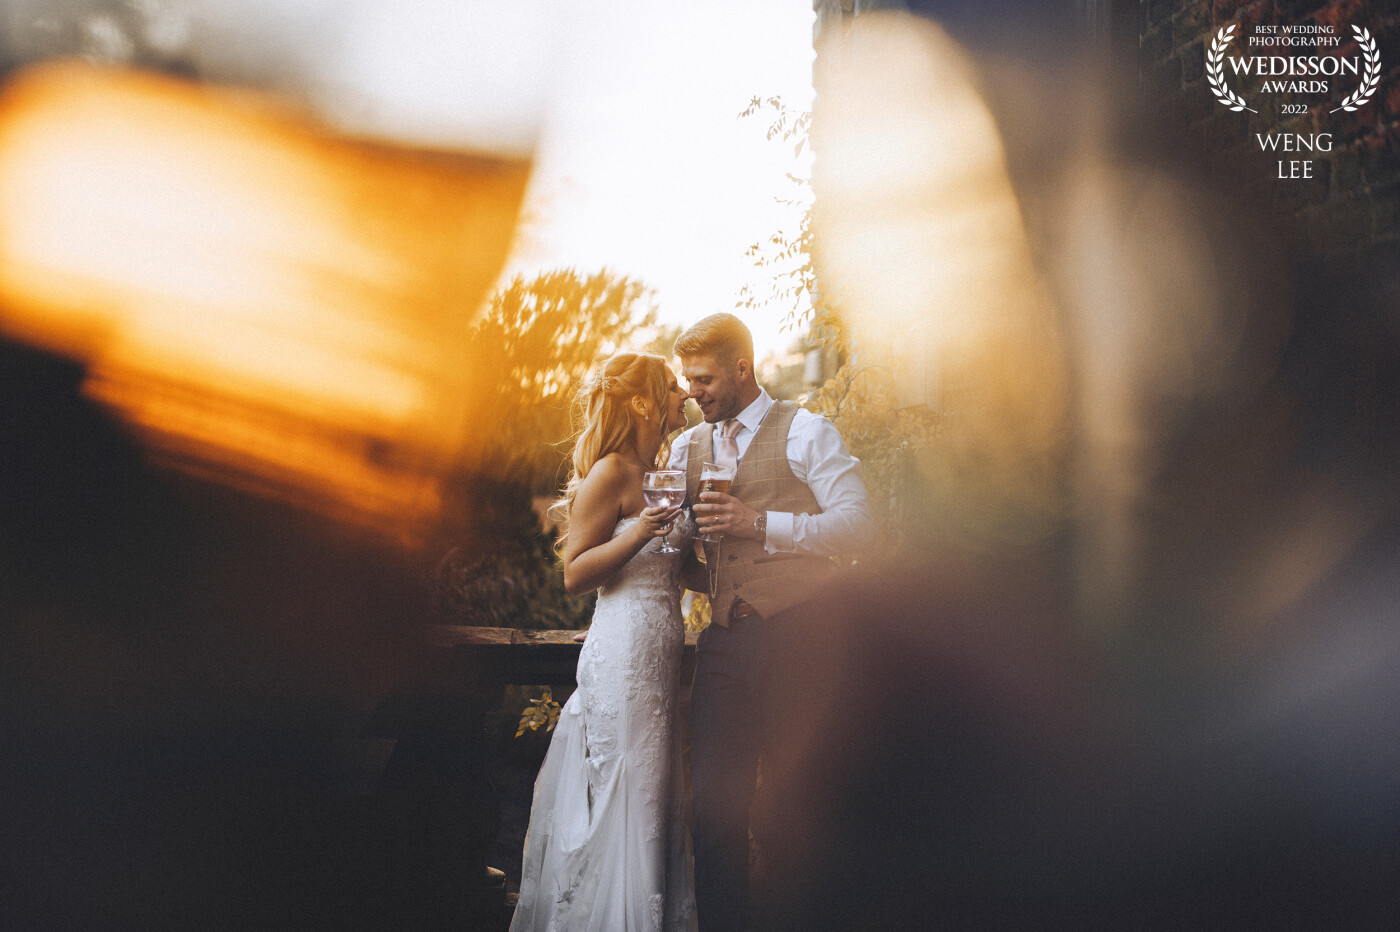 Lovely couple, in time for the sunset shoot, perfect venue Hirst Priory, Lincolnshire. Captured through 2 glass of beer and create the bokeh effect ????????